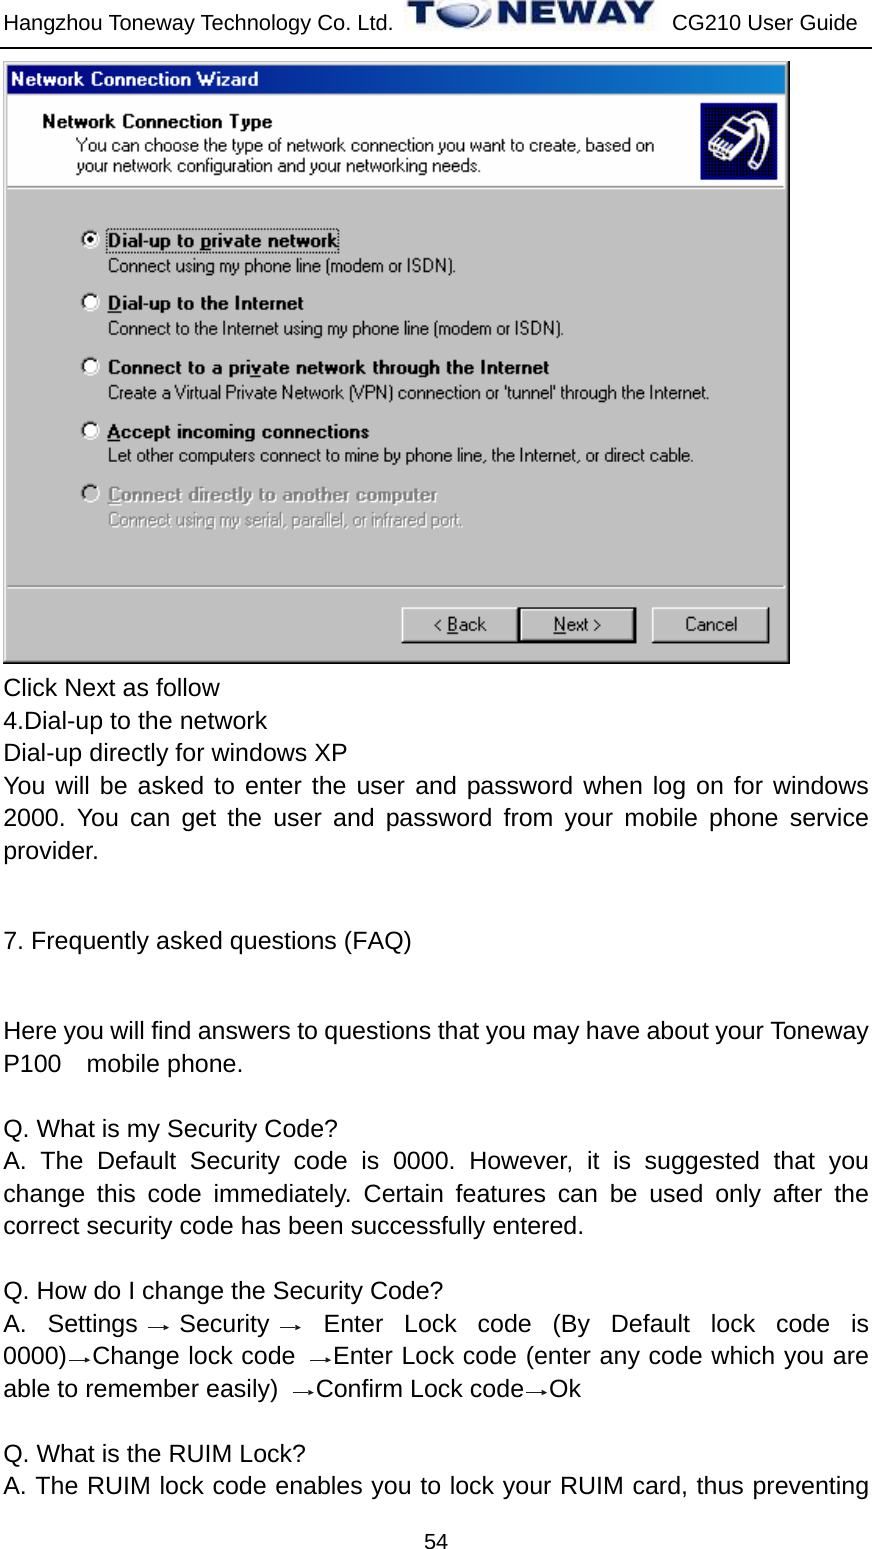 Hangzhou Toneway Technology Co. Ltd.    CG210 User Guide 54  Click Next as follow 4.Dial-up to the network Dial-up directly for windows XP You will be asked to enter the user and password when log on for windows 2000. You can get the user and password from your mobile phone service provider. 7. Frequently asked questions (FAQ) Here you will find answers to questions that you may have about your Toneway P100 mobile phone.    Q. What is my Security Code? A. The Default Security code is 0000. However, it is suggested that you change this code immediately. Certain features can be used only after the correct security code has been successfully entered.  Q. How do I change the Security Code? A. Settings Security  Enter Lock code (By Default lock code is 0000) Change lock code  Enter Lock code (enter any code which you are able to remember easily)  Confirm Lock code Ok  Q. What is the RUIM Lock? A. The RUIM lock code enables you to lock your RUIM card, thus preventing 